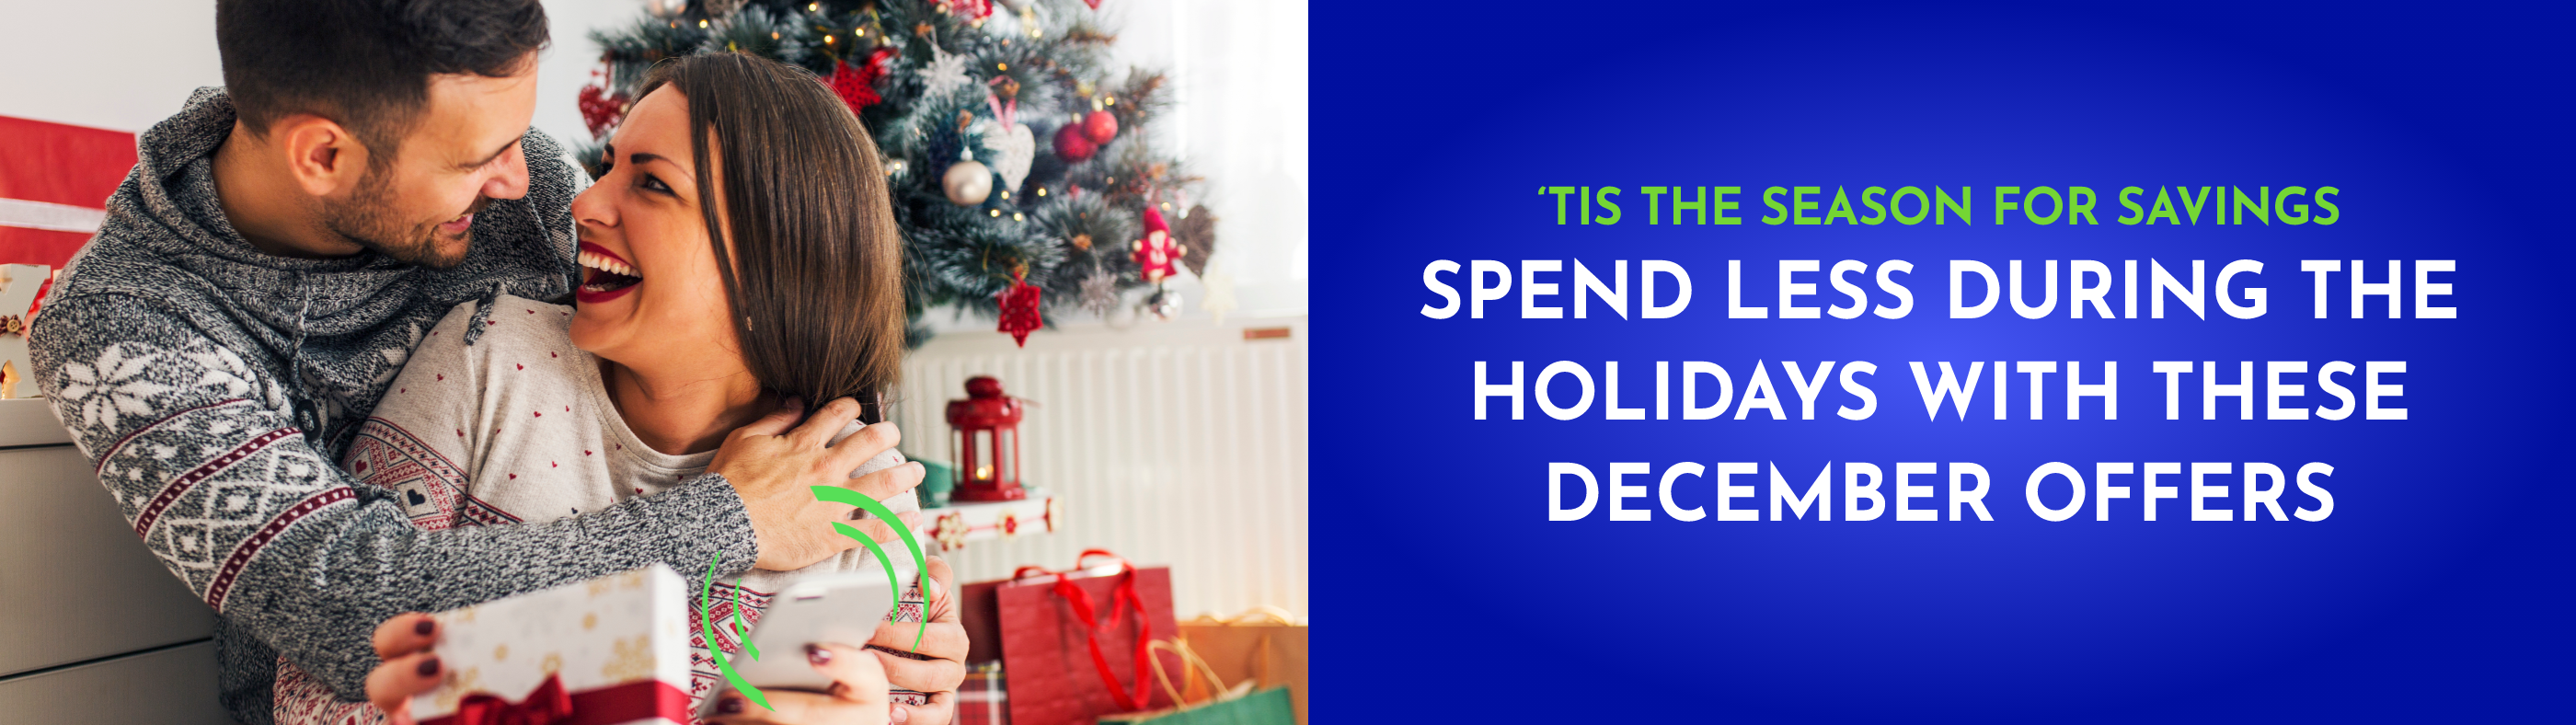 TIS THE SEASON FOR SAVINGS - SPEND LESS DURING THE HOLIDAYS WITH THESE DECEMBER OFFERS